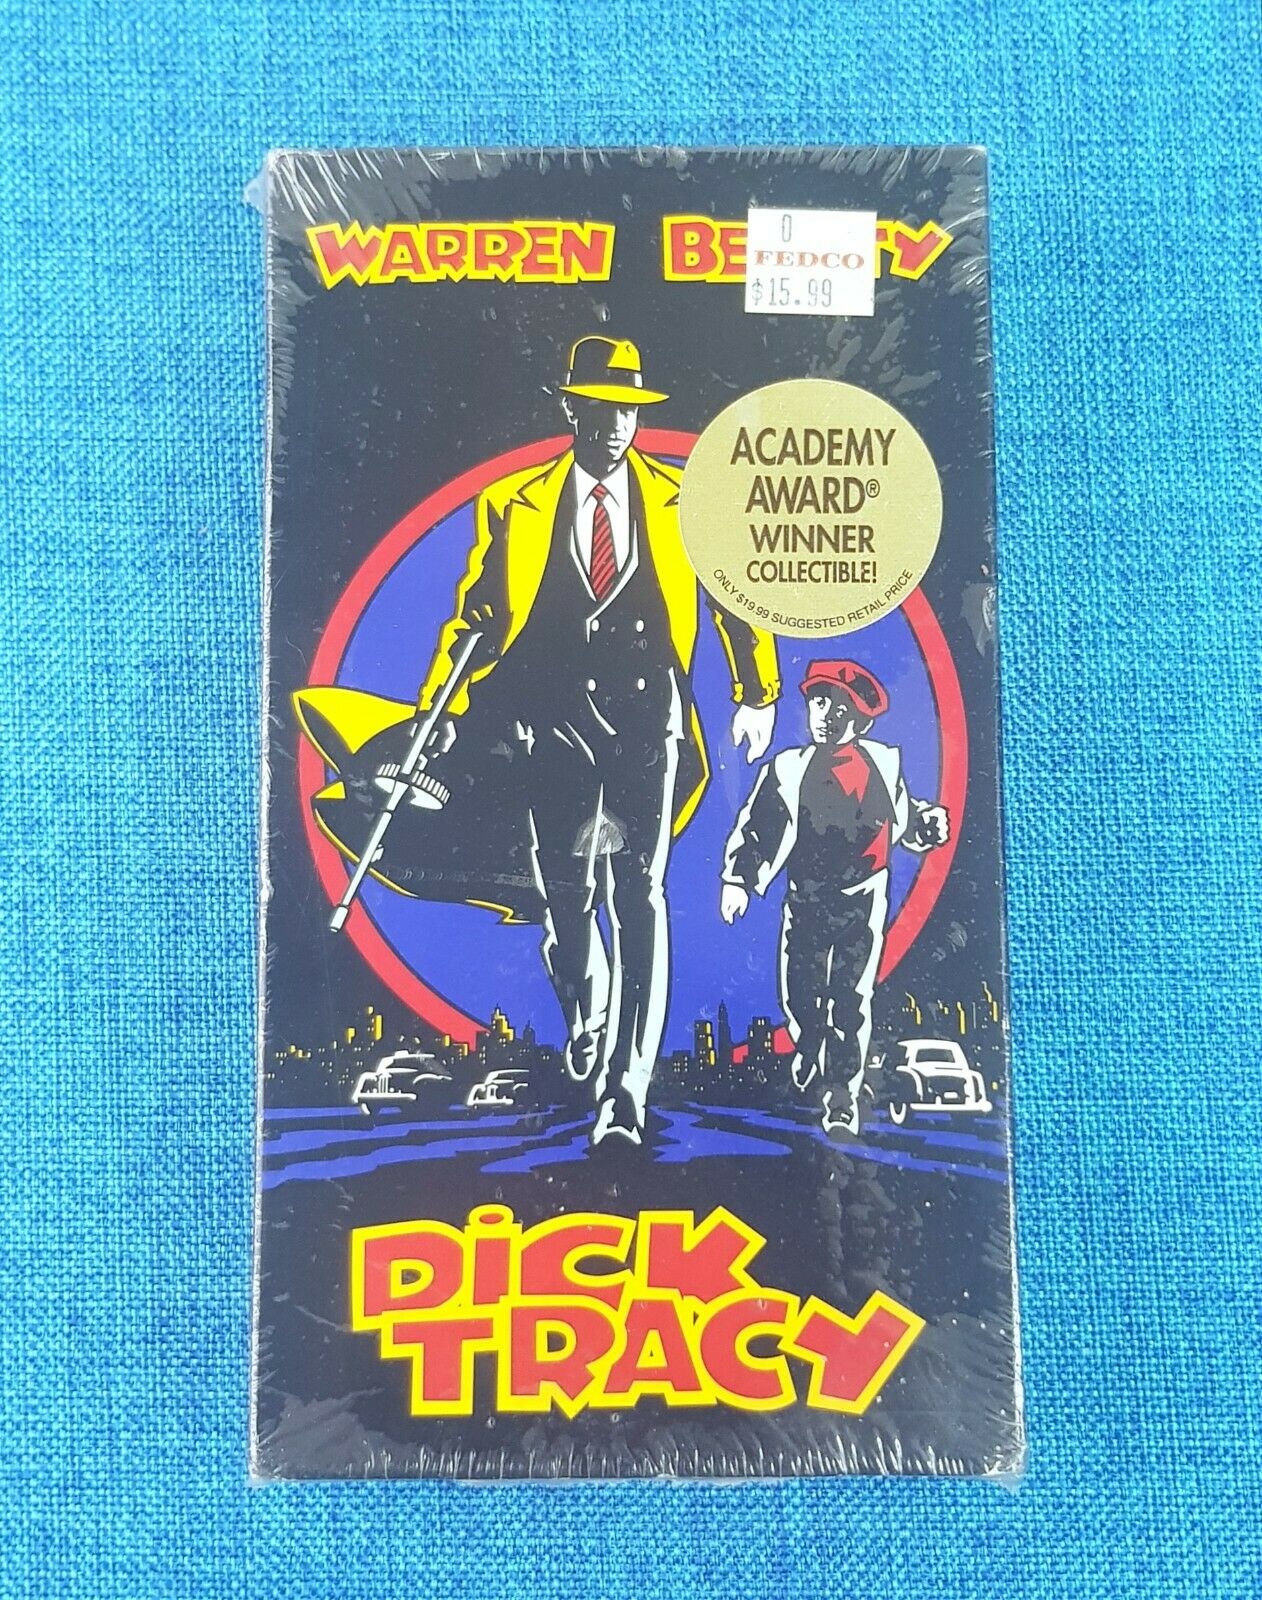 Madonna Sealed Dick Tracy Vhs Red Gift Bag Limited Edt Promo Hype Oscar Disney